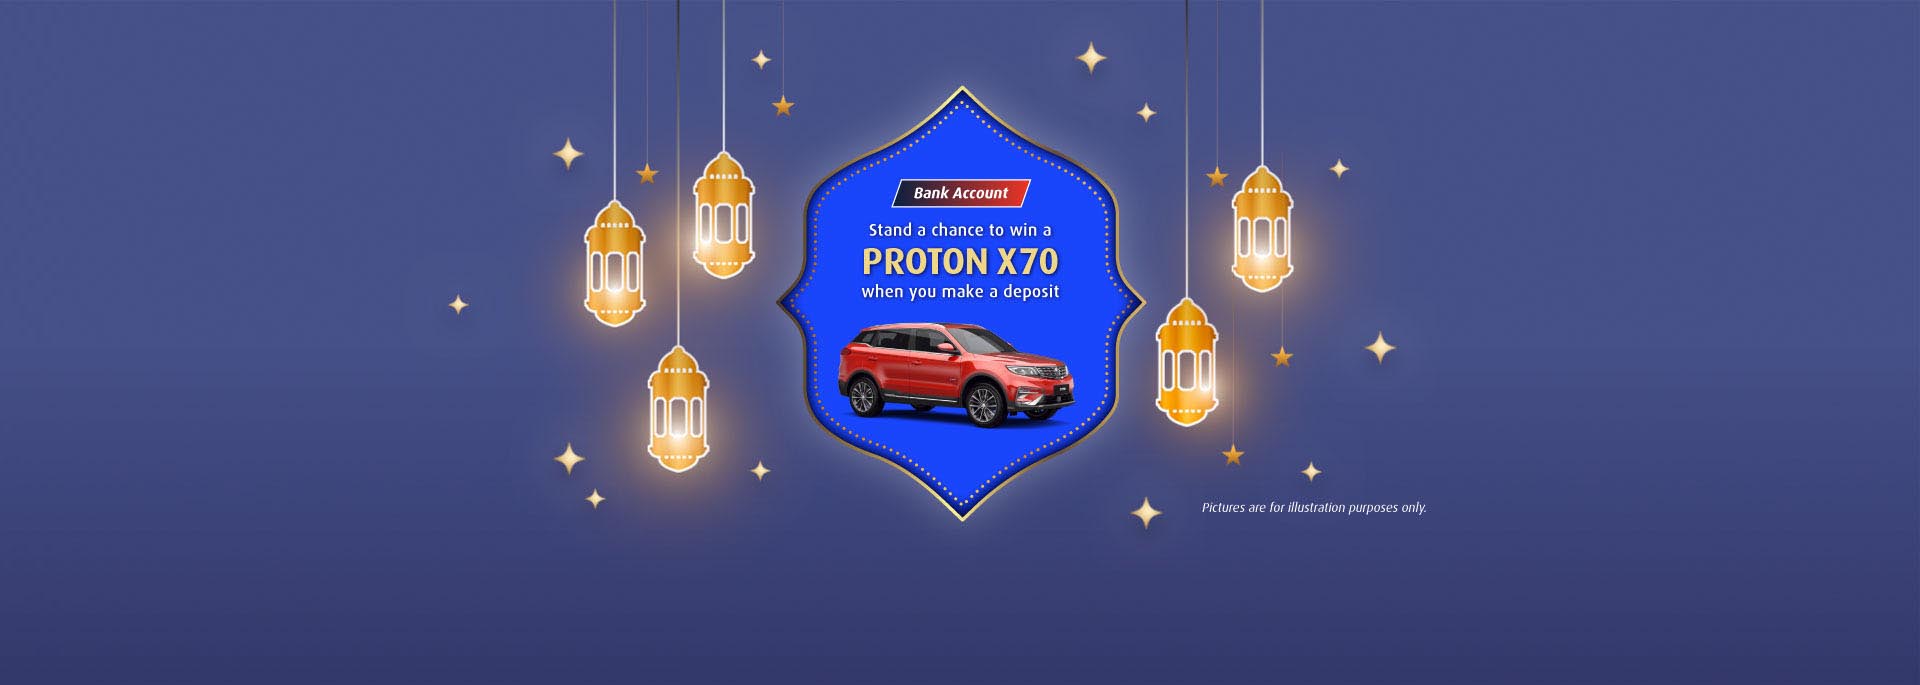 Stand a chance to win a Proton X70 when you make a deposit